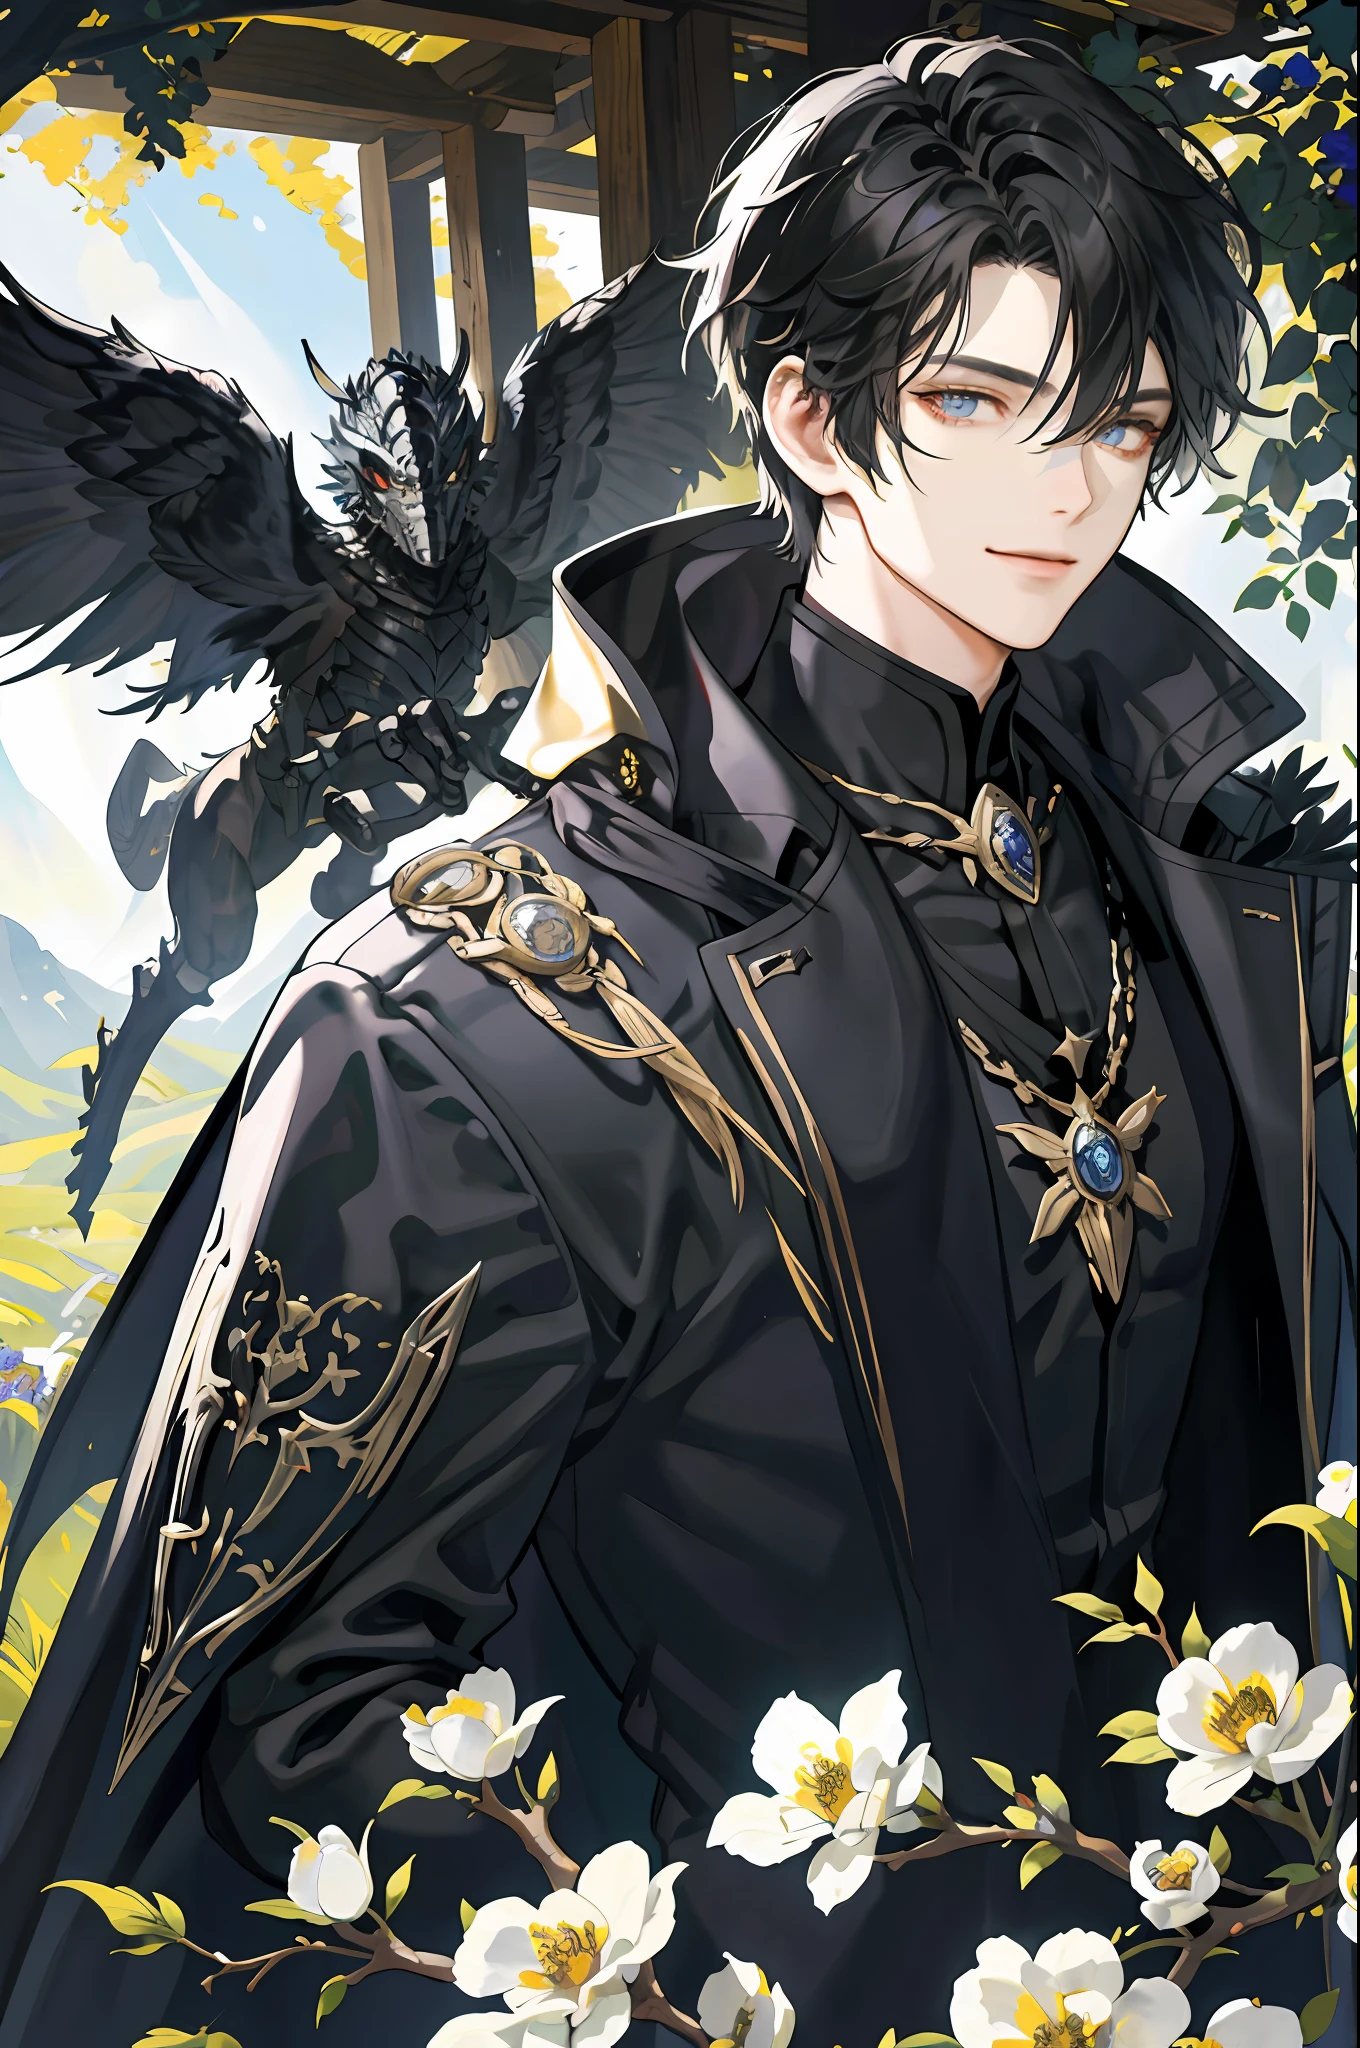 ((Masterpiece: 1.2, best quality)), 2 men, old man, nice middle, muscular, valiant, strong, black knight, golden eyes, short black hair, uniform, white robe, scar on right eye, black armor, fantasy, forest, blooming flowers, sunlight, fantastic light and shadow, landscape, highly detailed face, portrait, smile